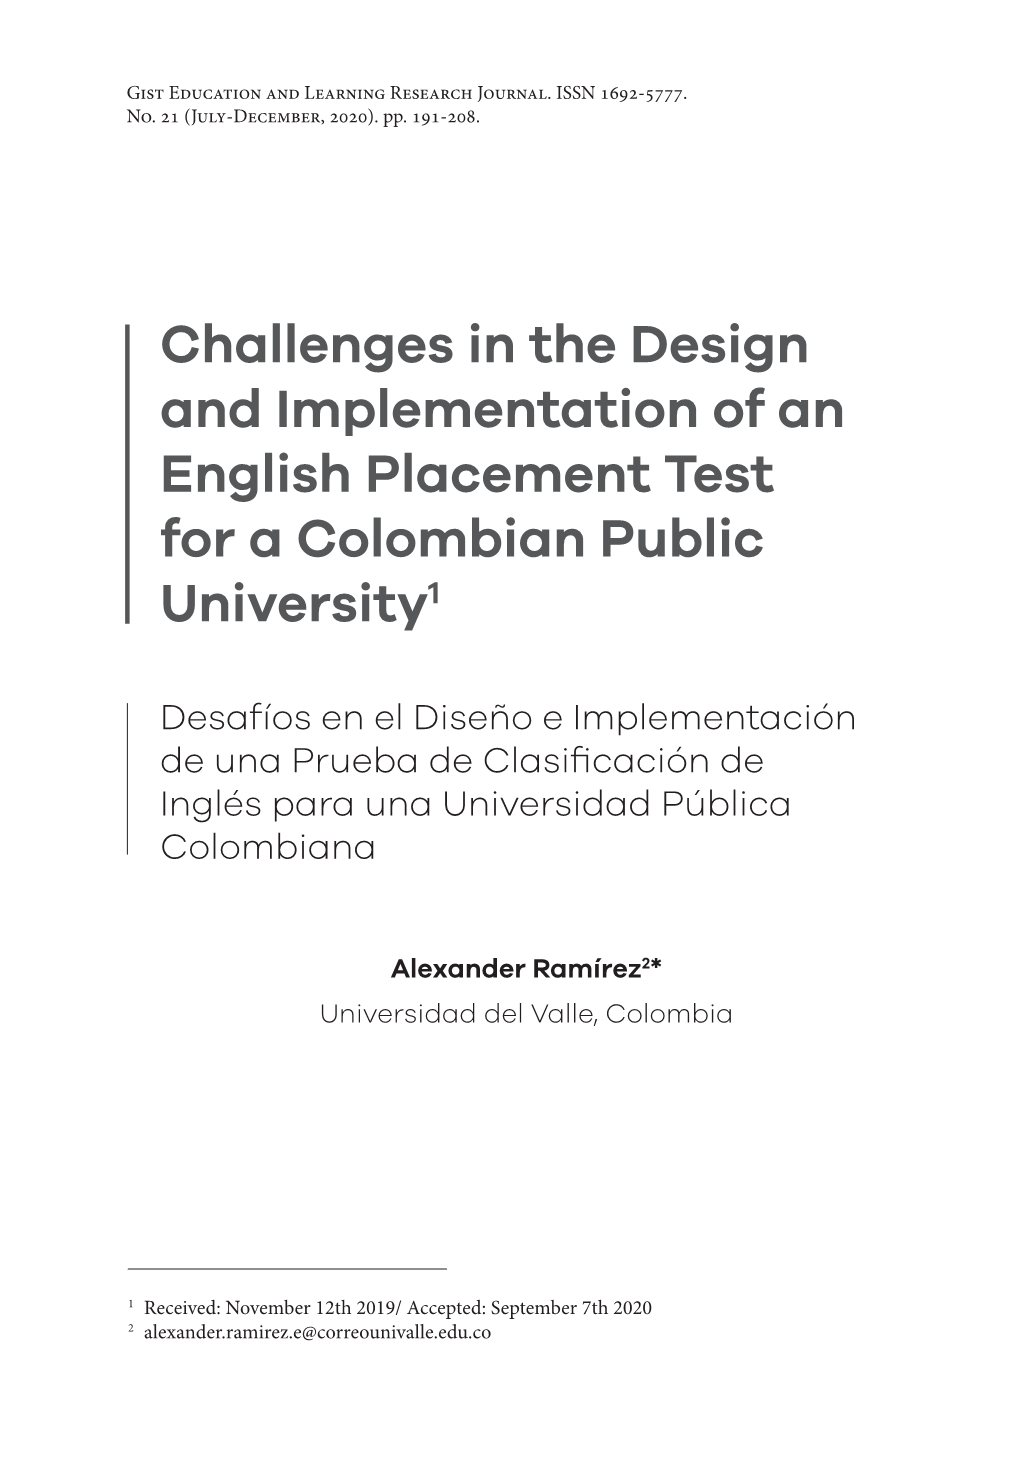 Challenges in the Design and Implementation of an English Placement Test for a Colombian Public University1